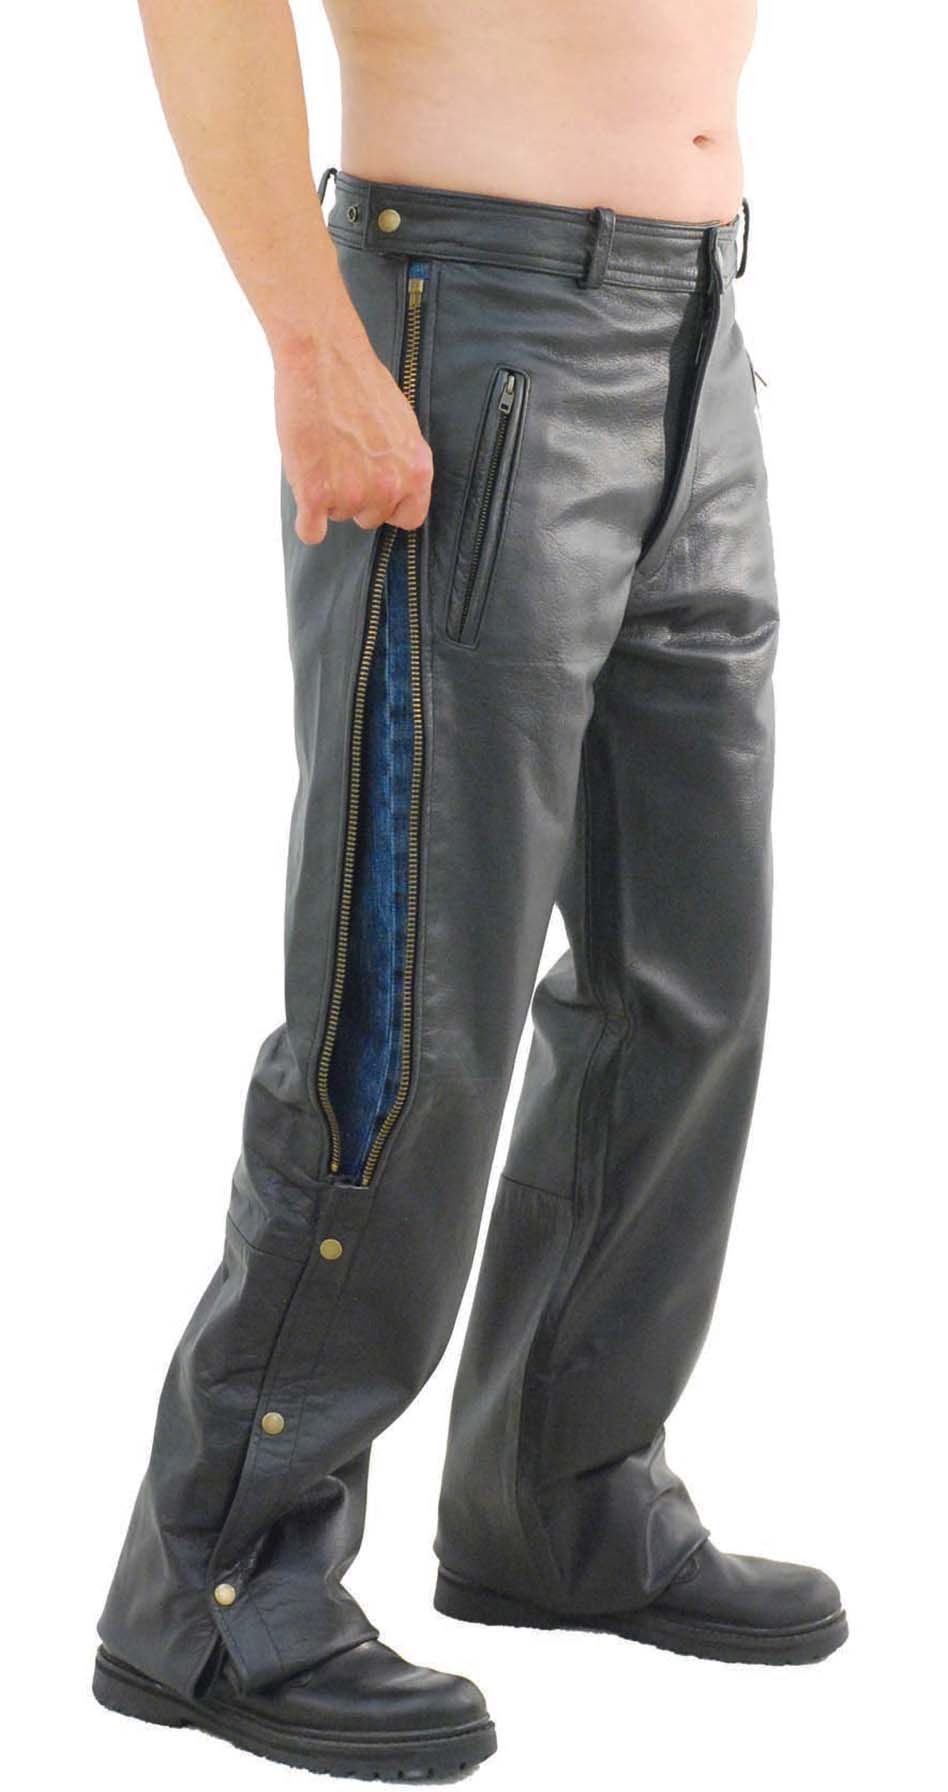 biker wearing leather motorcycle jeans with zip and snap sides